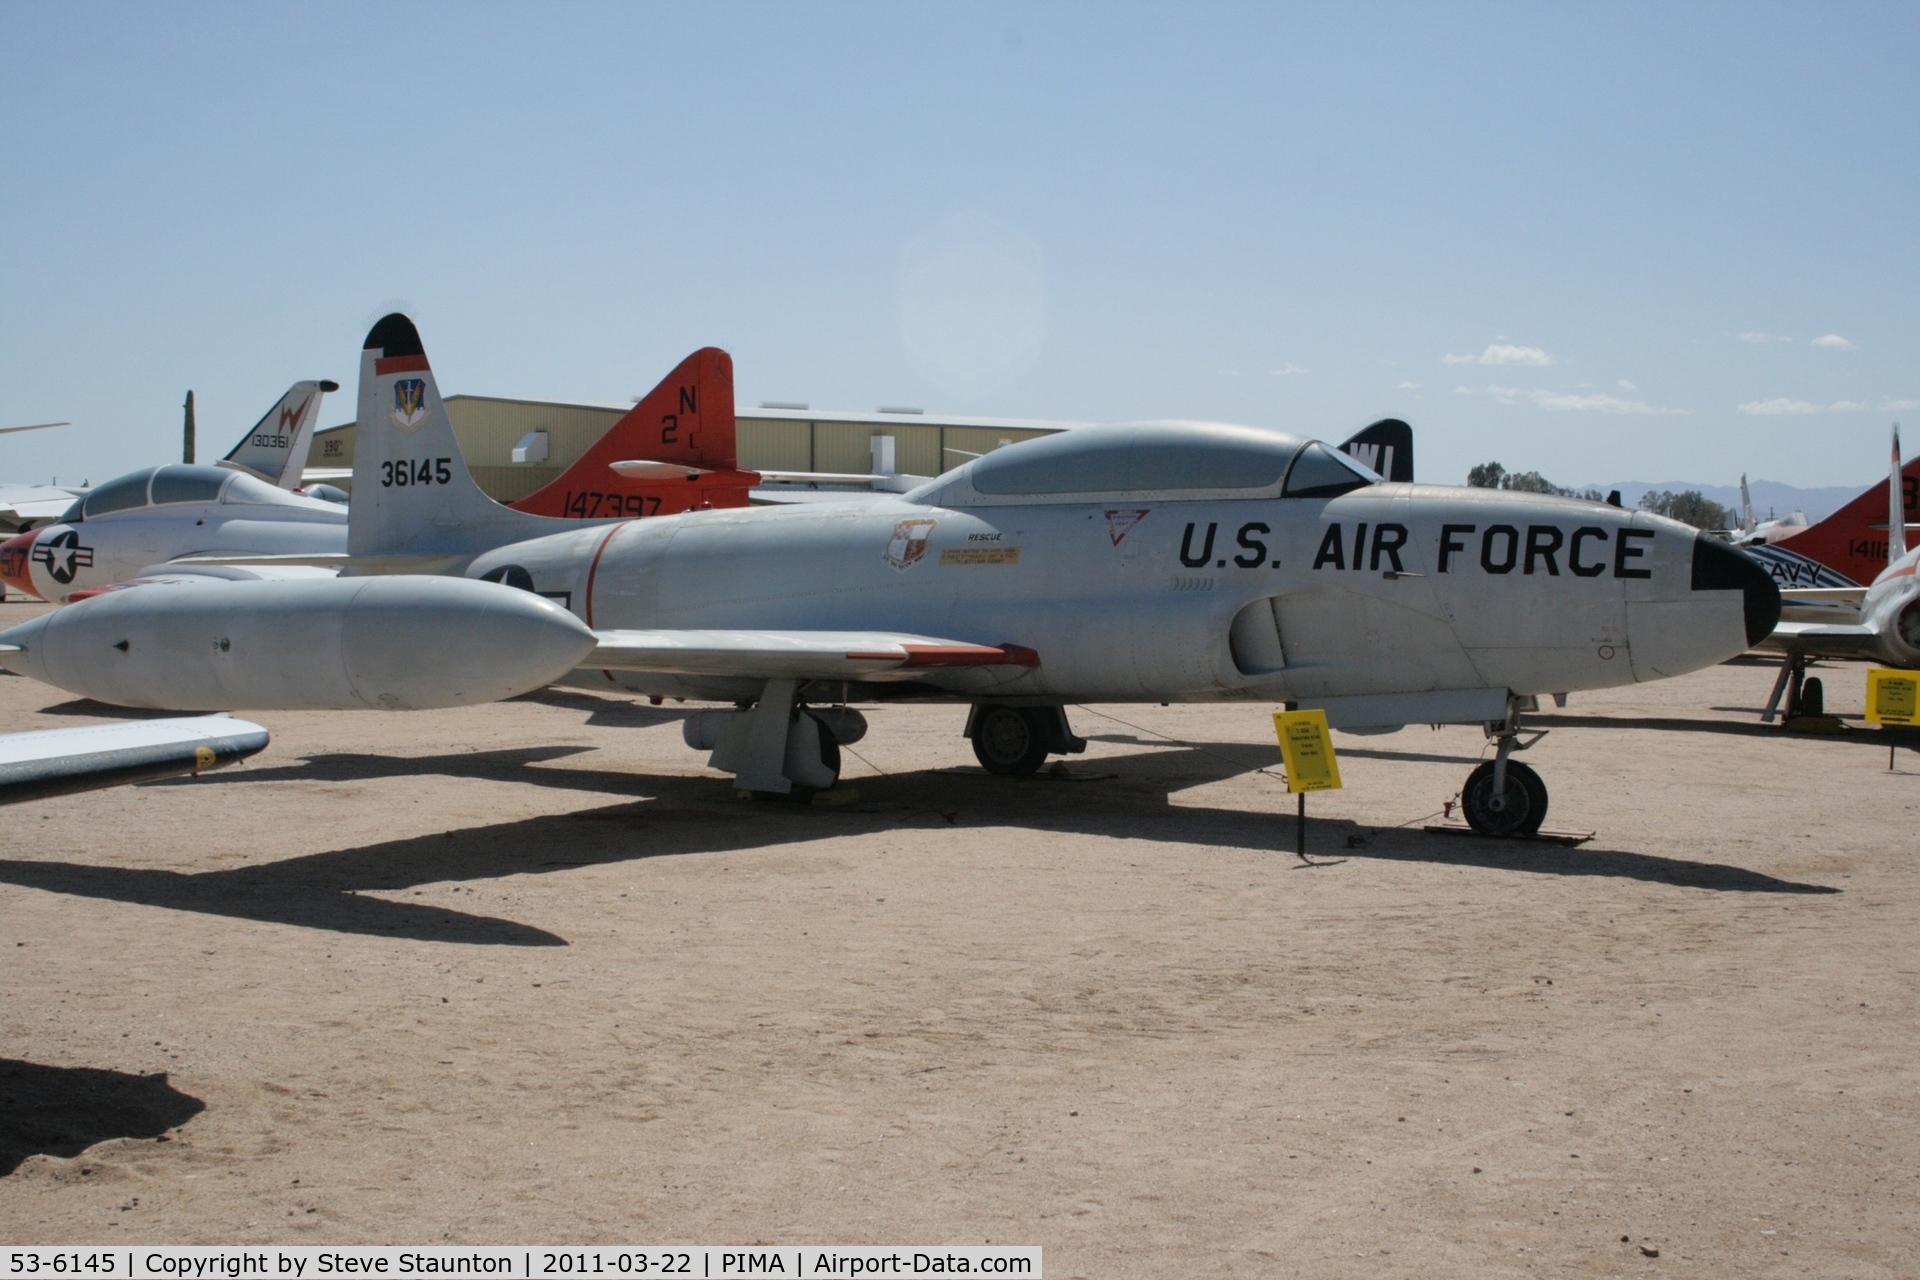 53-6145, 1953 Lockheed T-33A Shooting Star C/N 580-9767, Taken at Pima Air and Space Museum, in March 2011 whilst on an Aeroprint Aviation tour